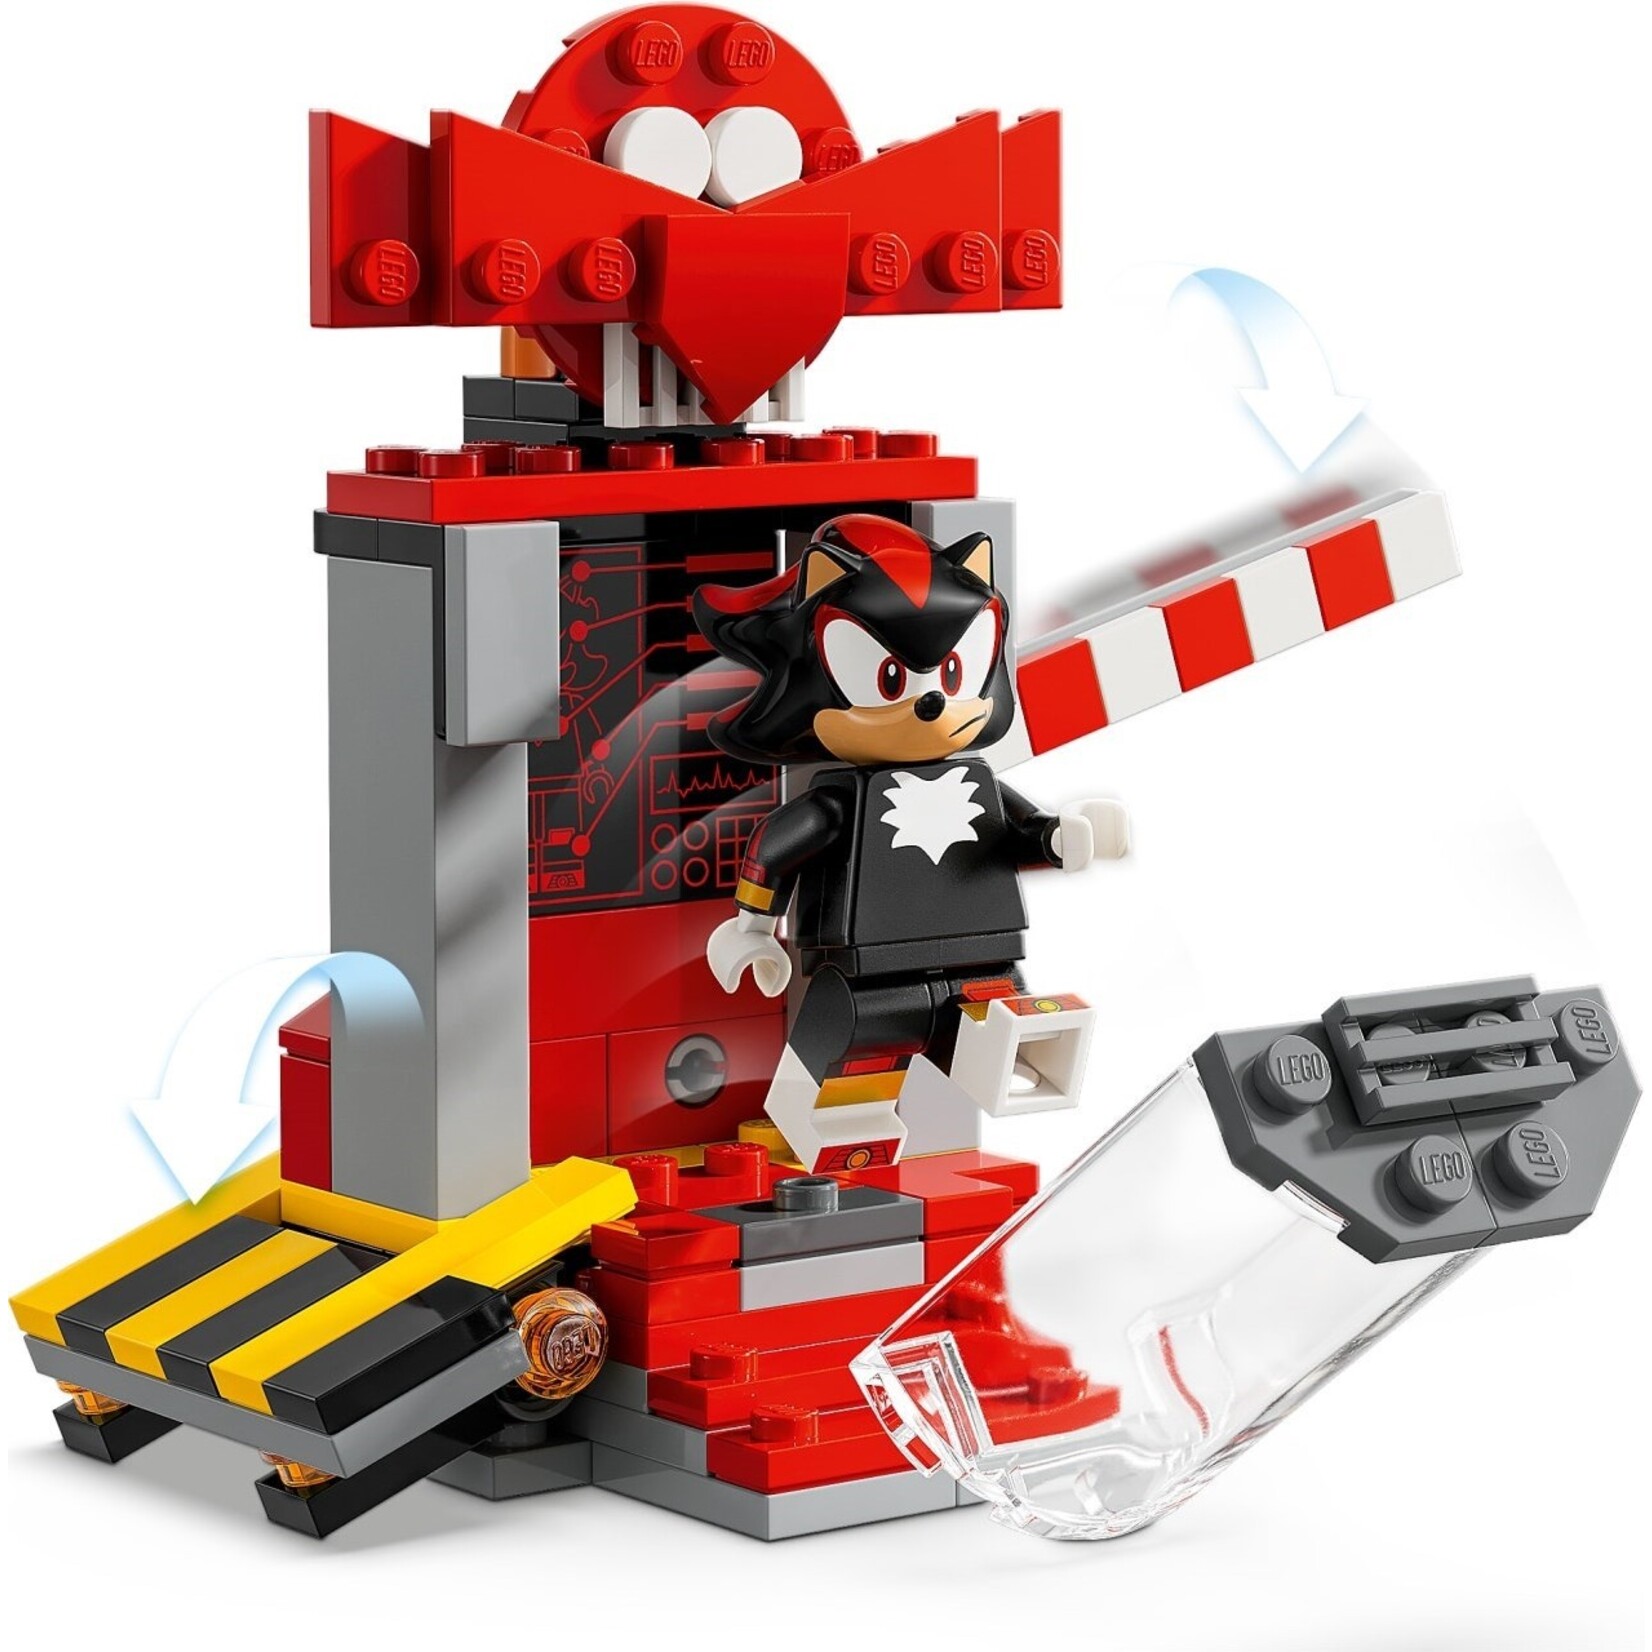 LEGO Shadow the Hedgehog ontsnapping - 76995